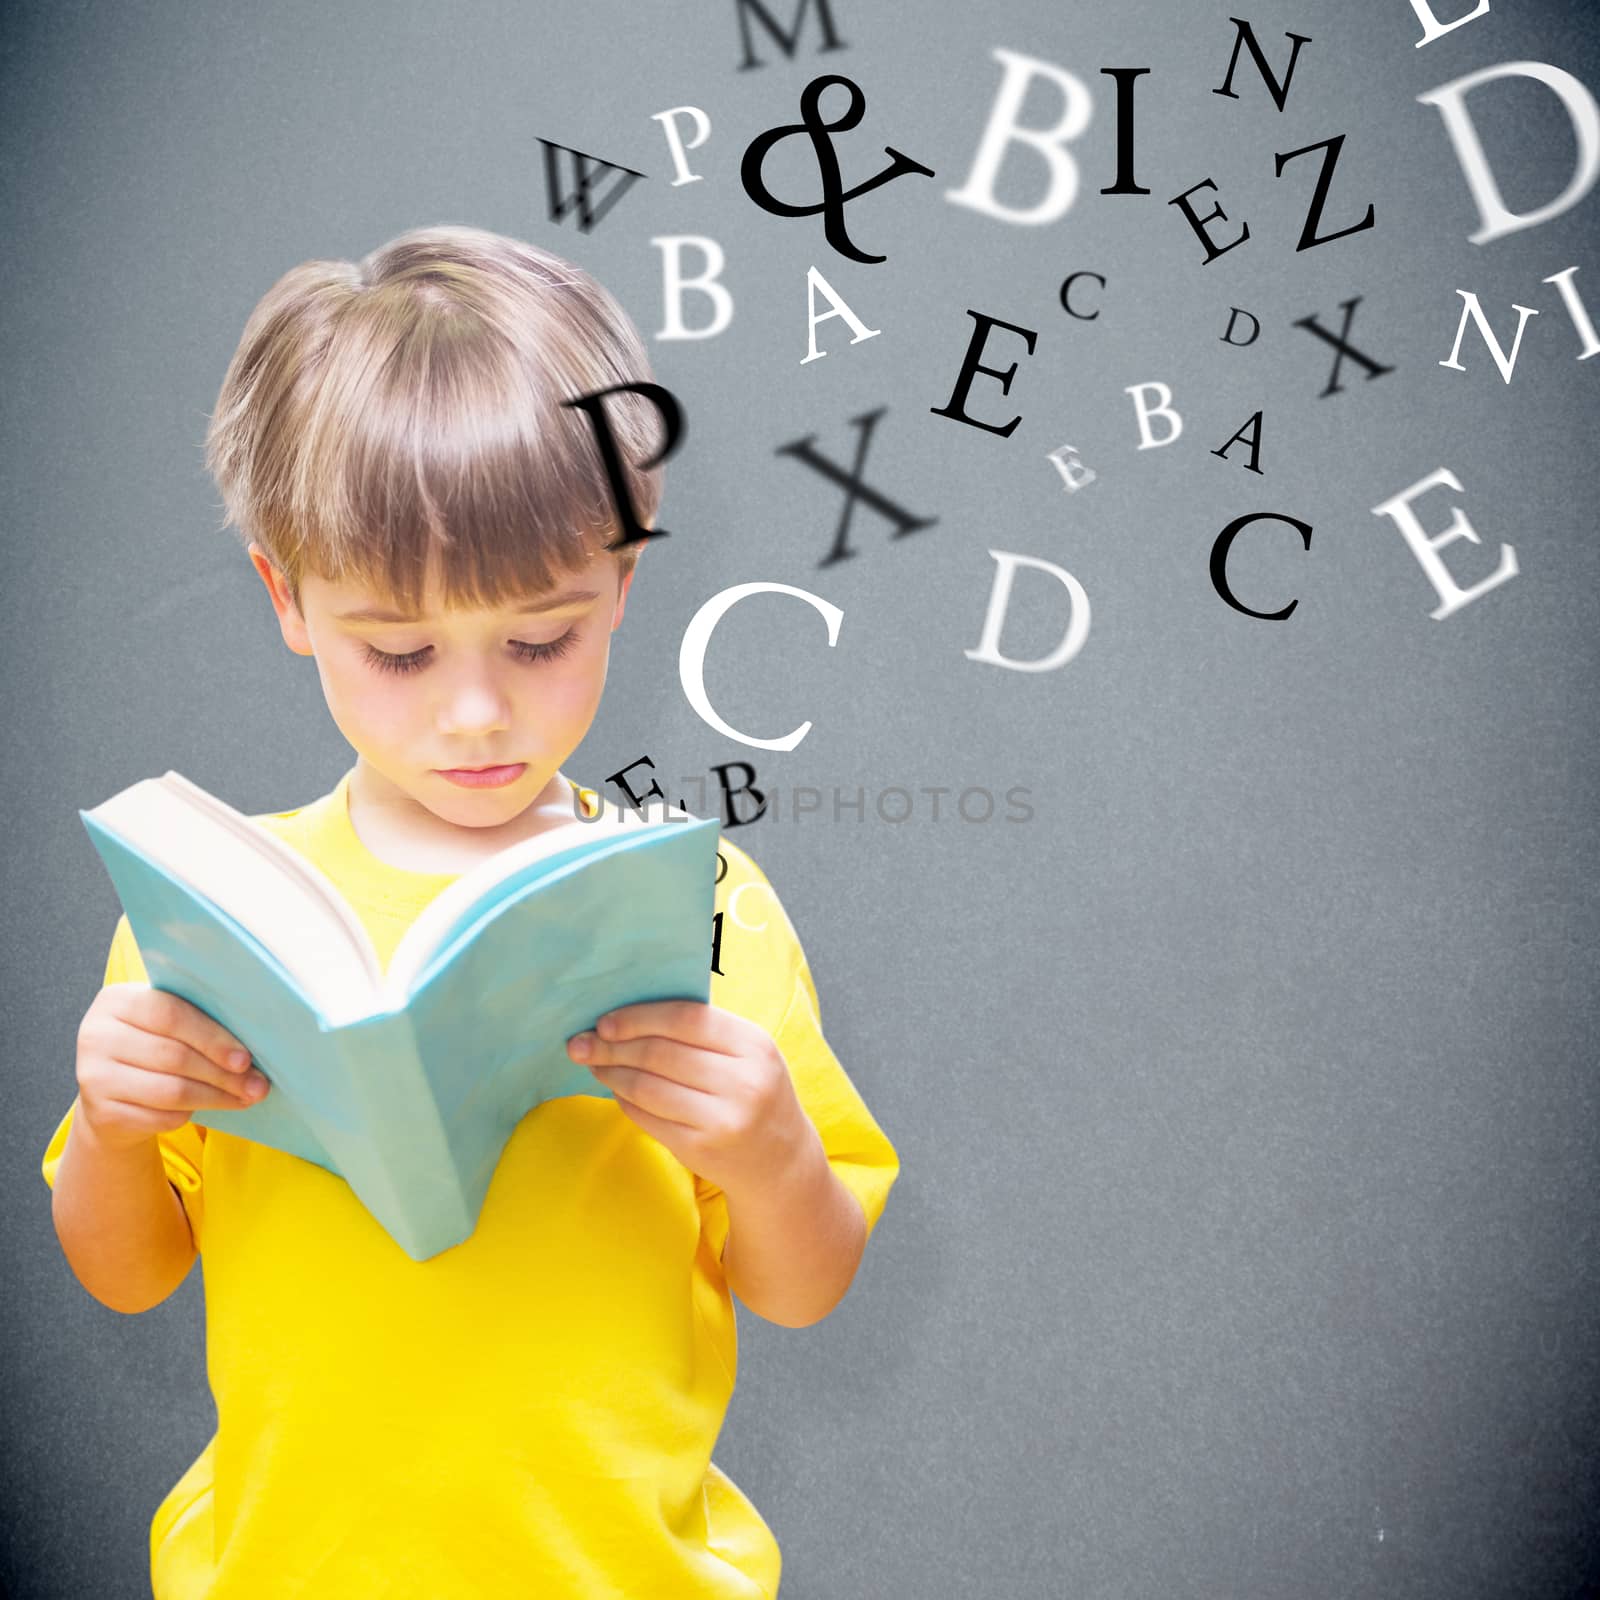 Pupil reading book against grey background